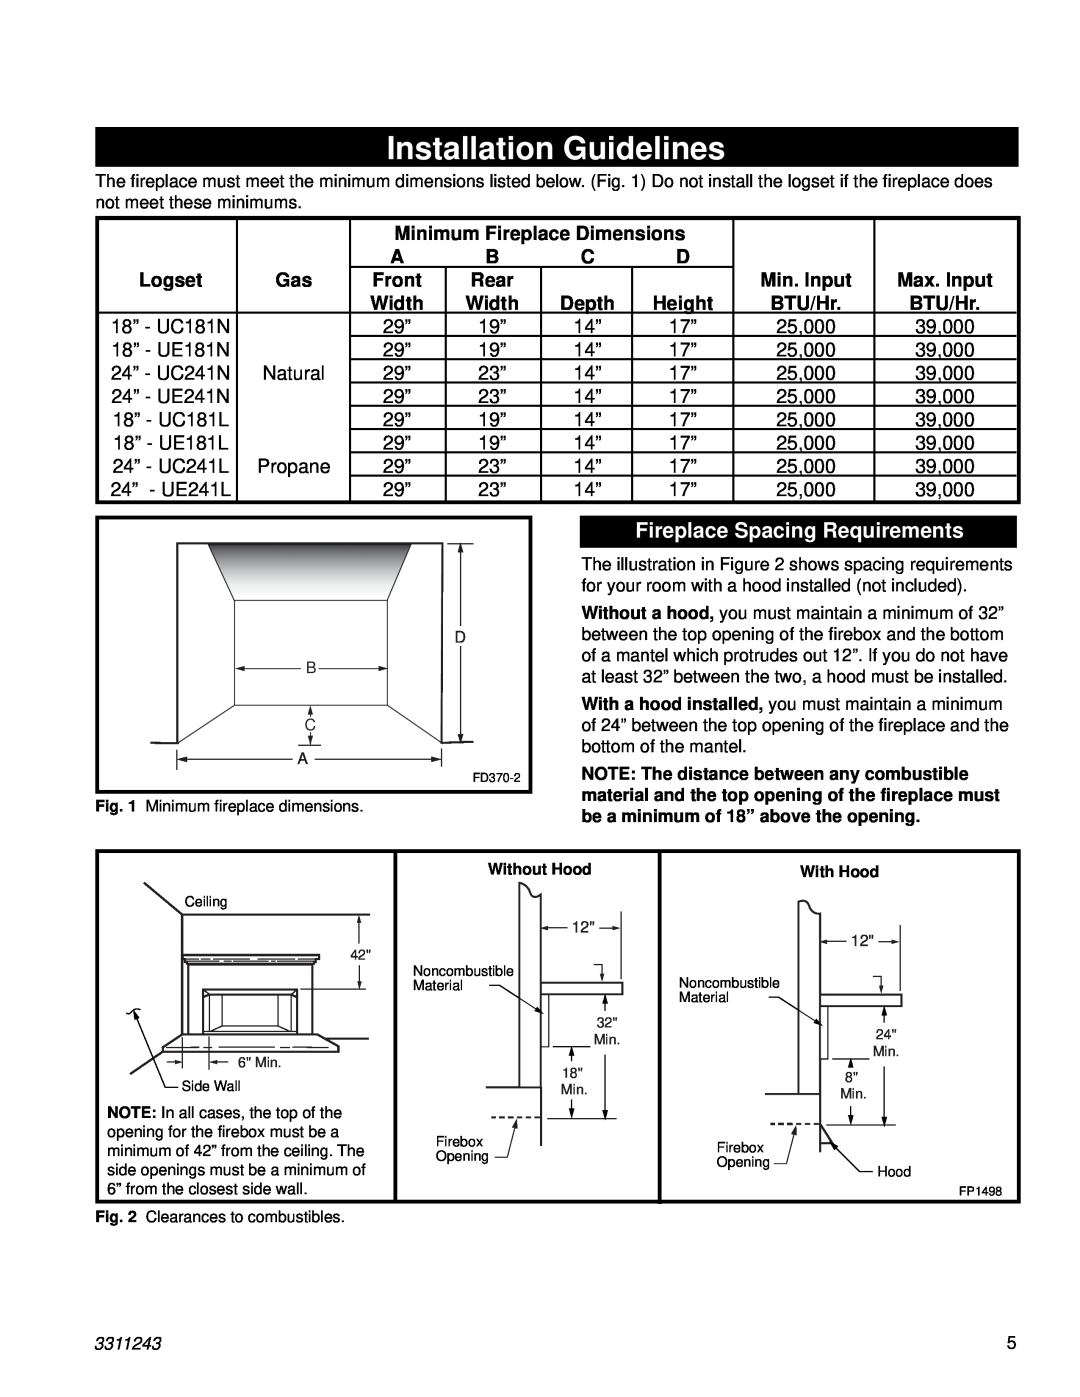 Vermont Casting UE241L, UC241L, UE181N, UE241N, UC181N, UC241N, UE181L Installation Guidelines, Fireplace Spacing Requirements 